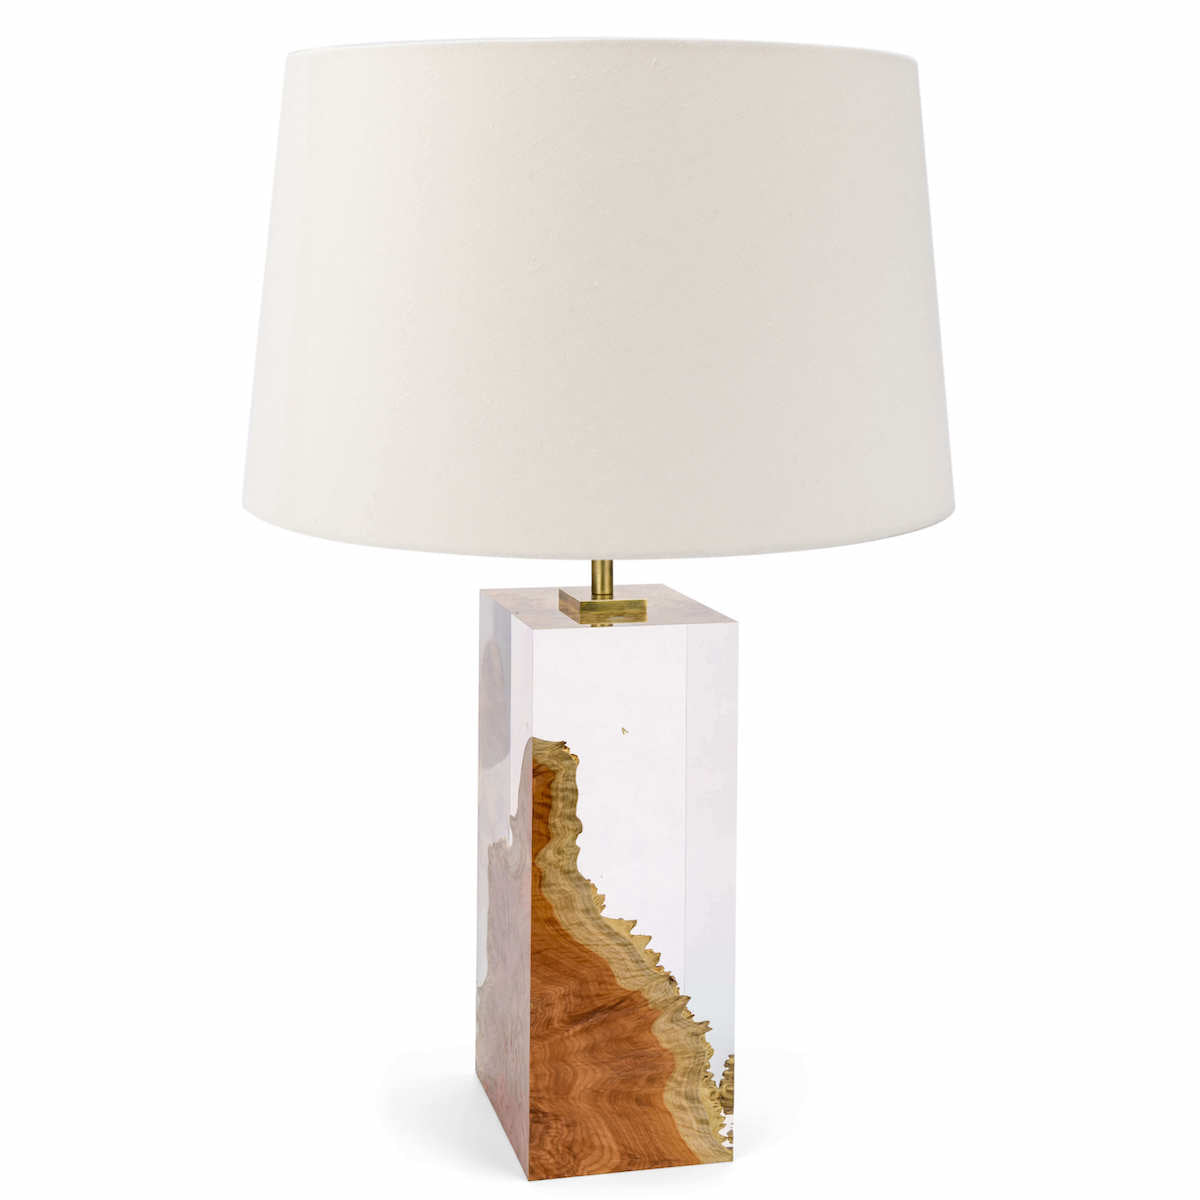 Coolibah and Acrylic Table Lamp II made by Iluka London for AUTHOR: home of British-made home decor